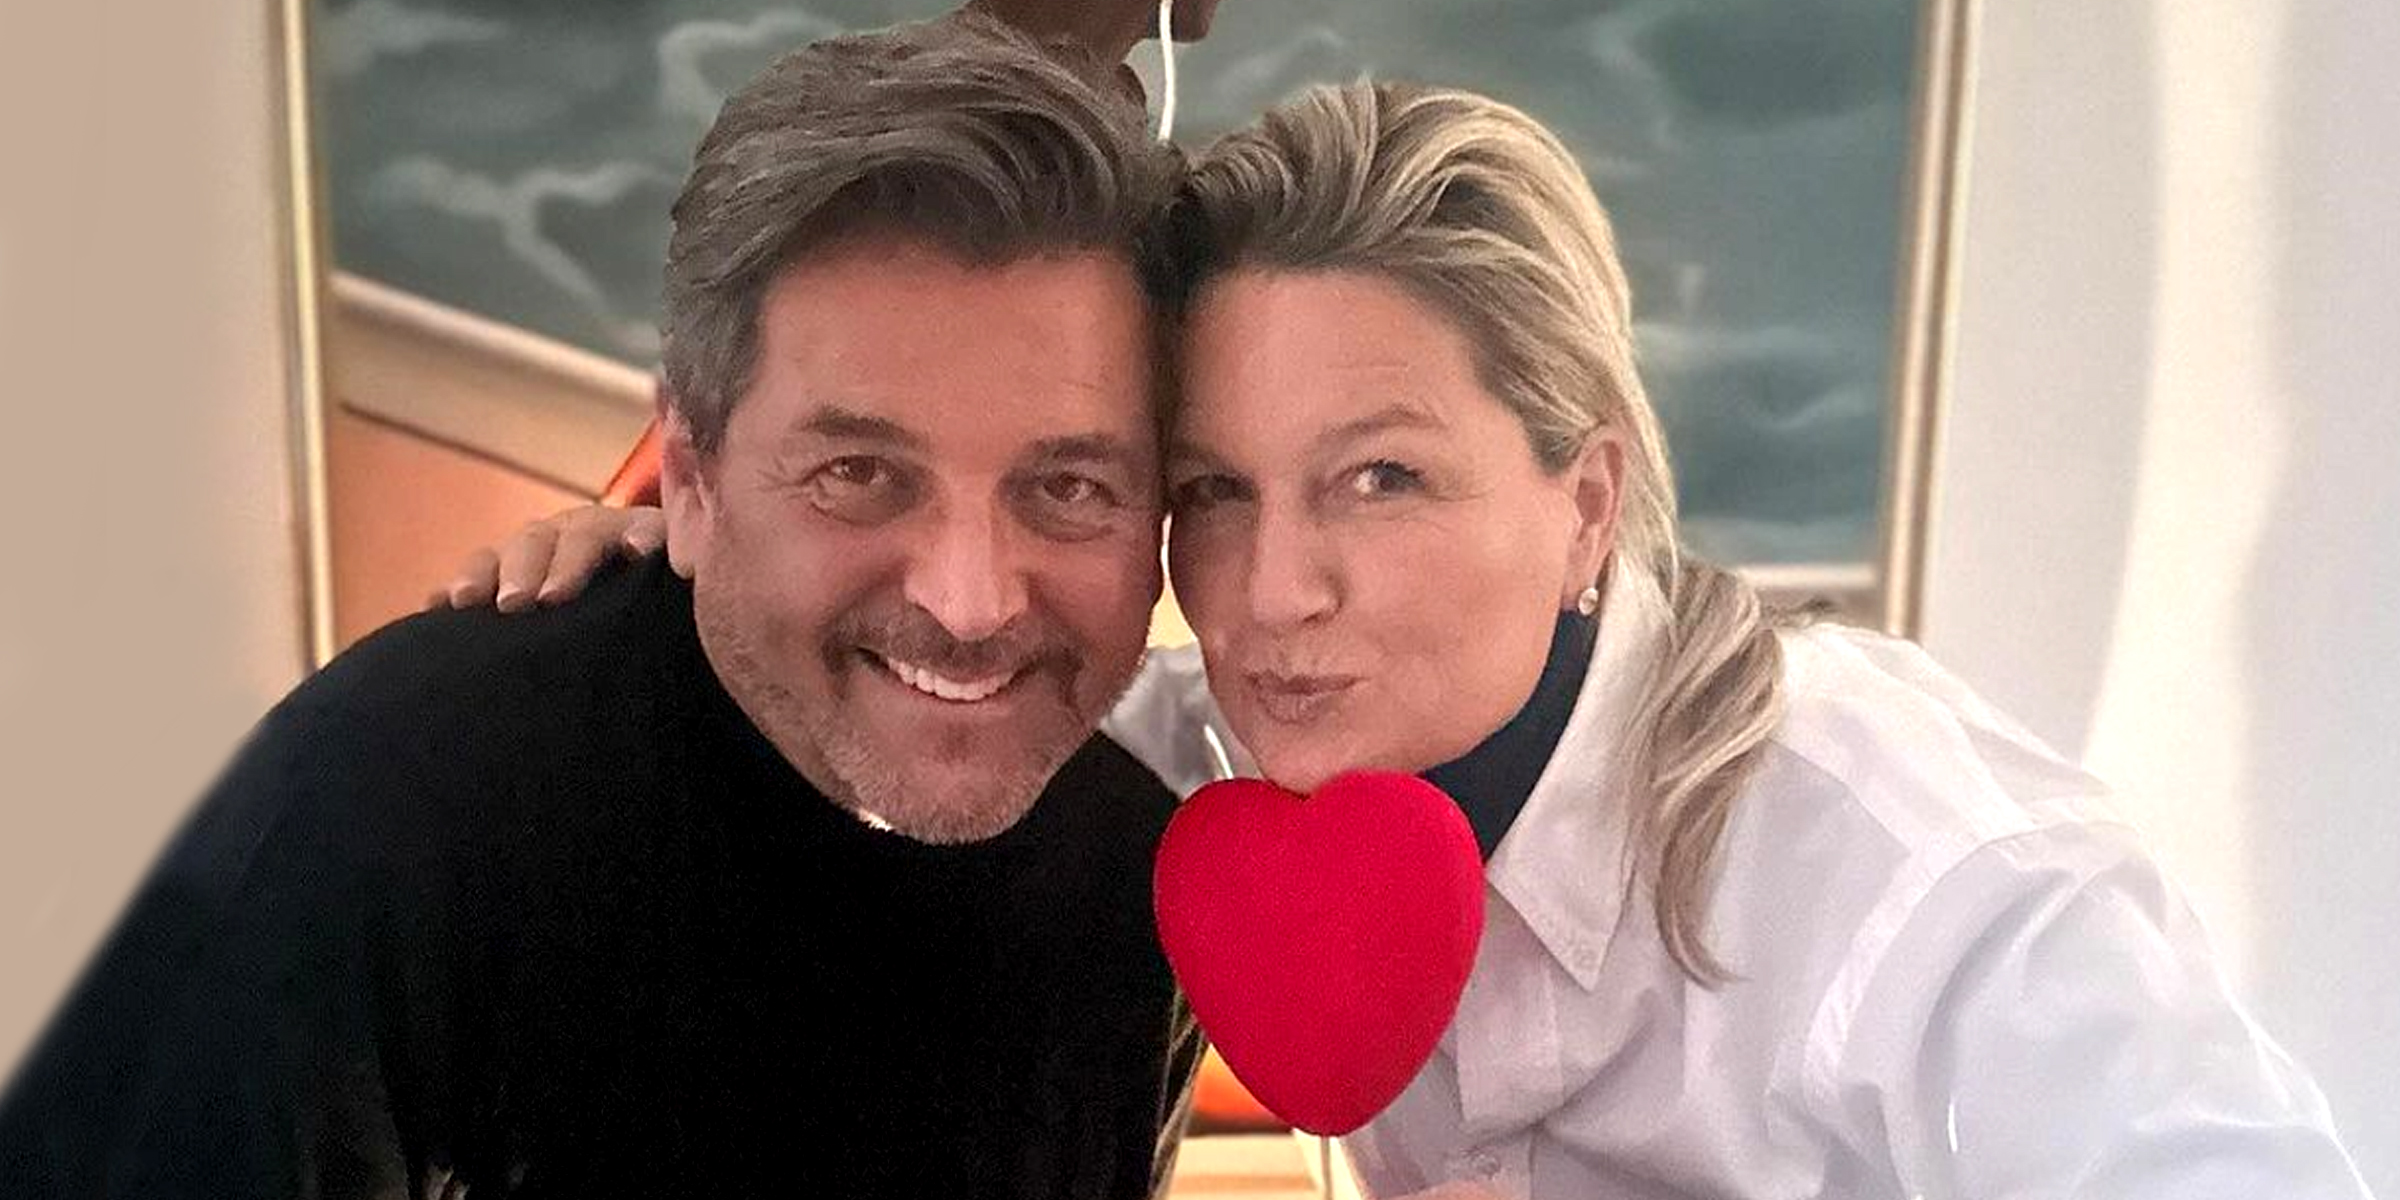 Thomas Anders und Frau Claudia | Quelle: Getty Images